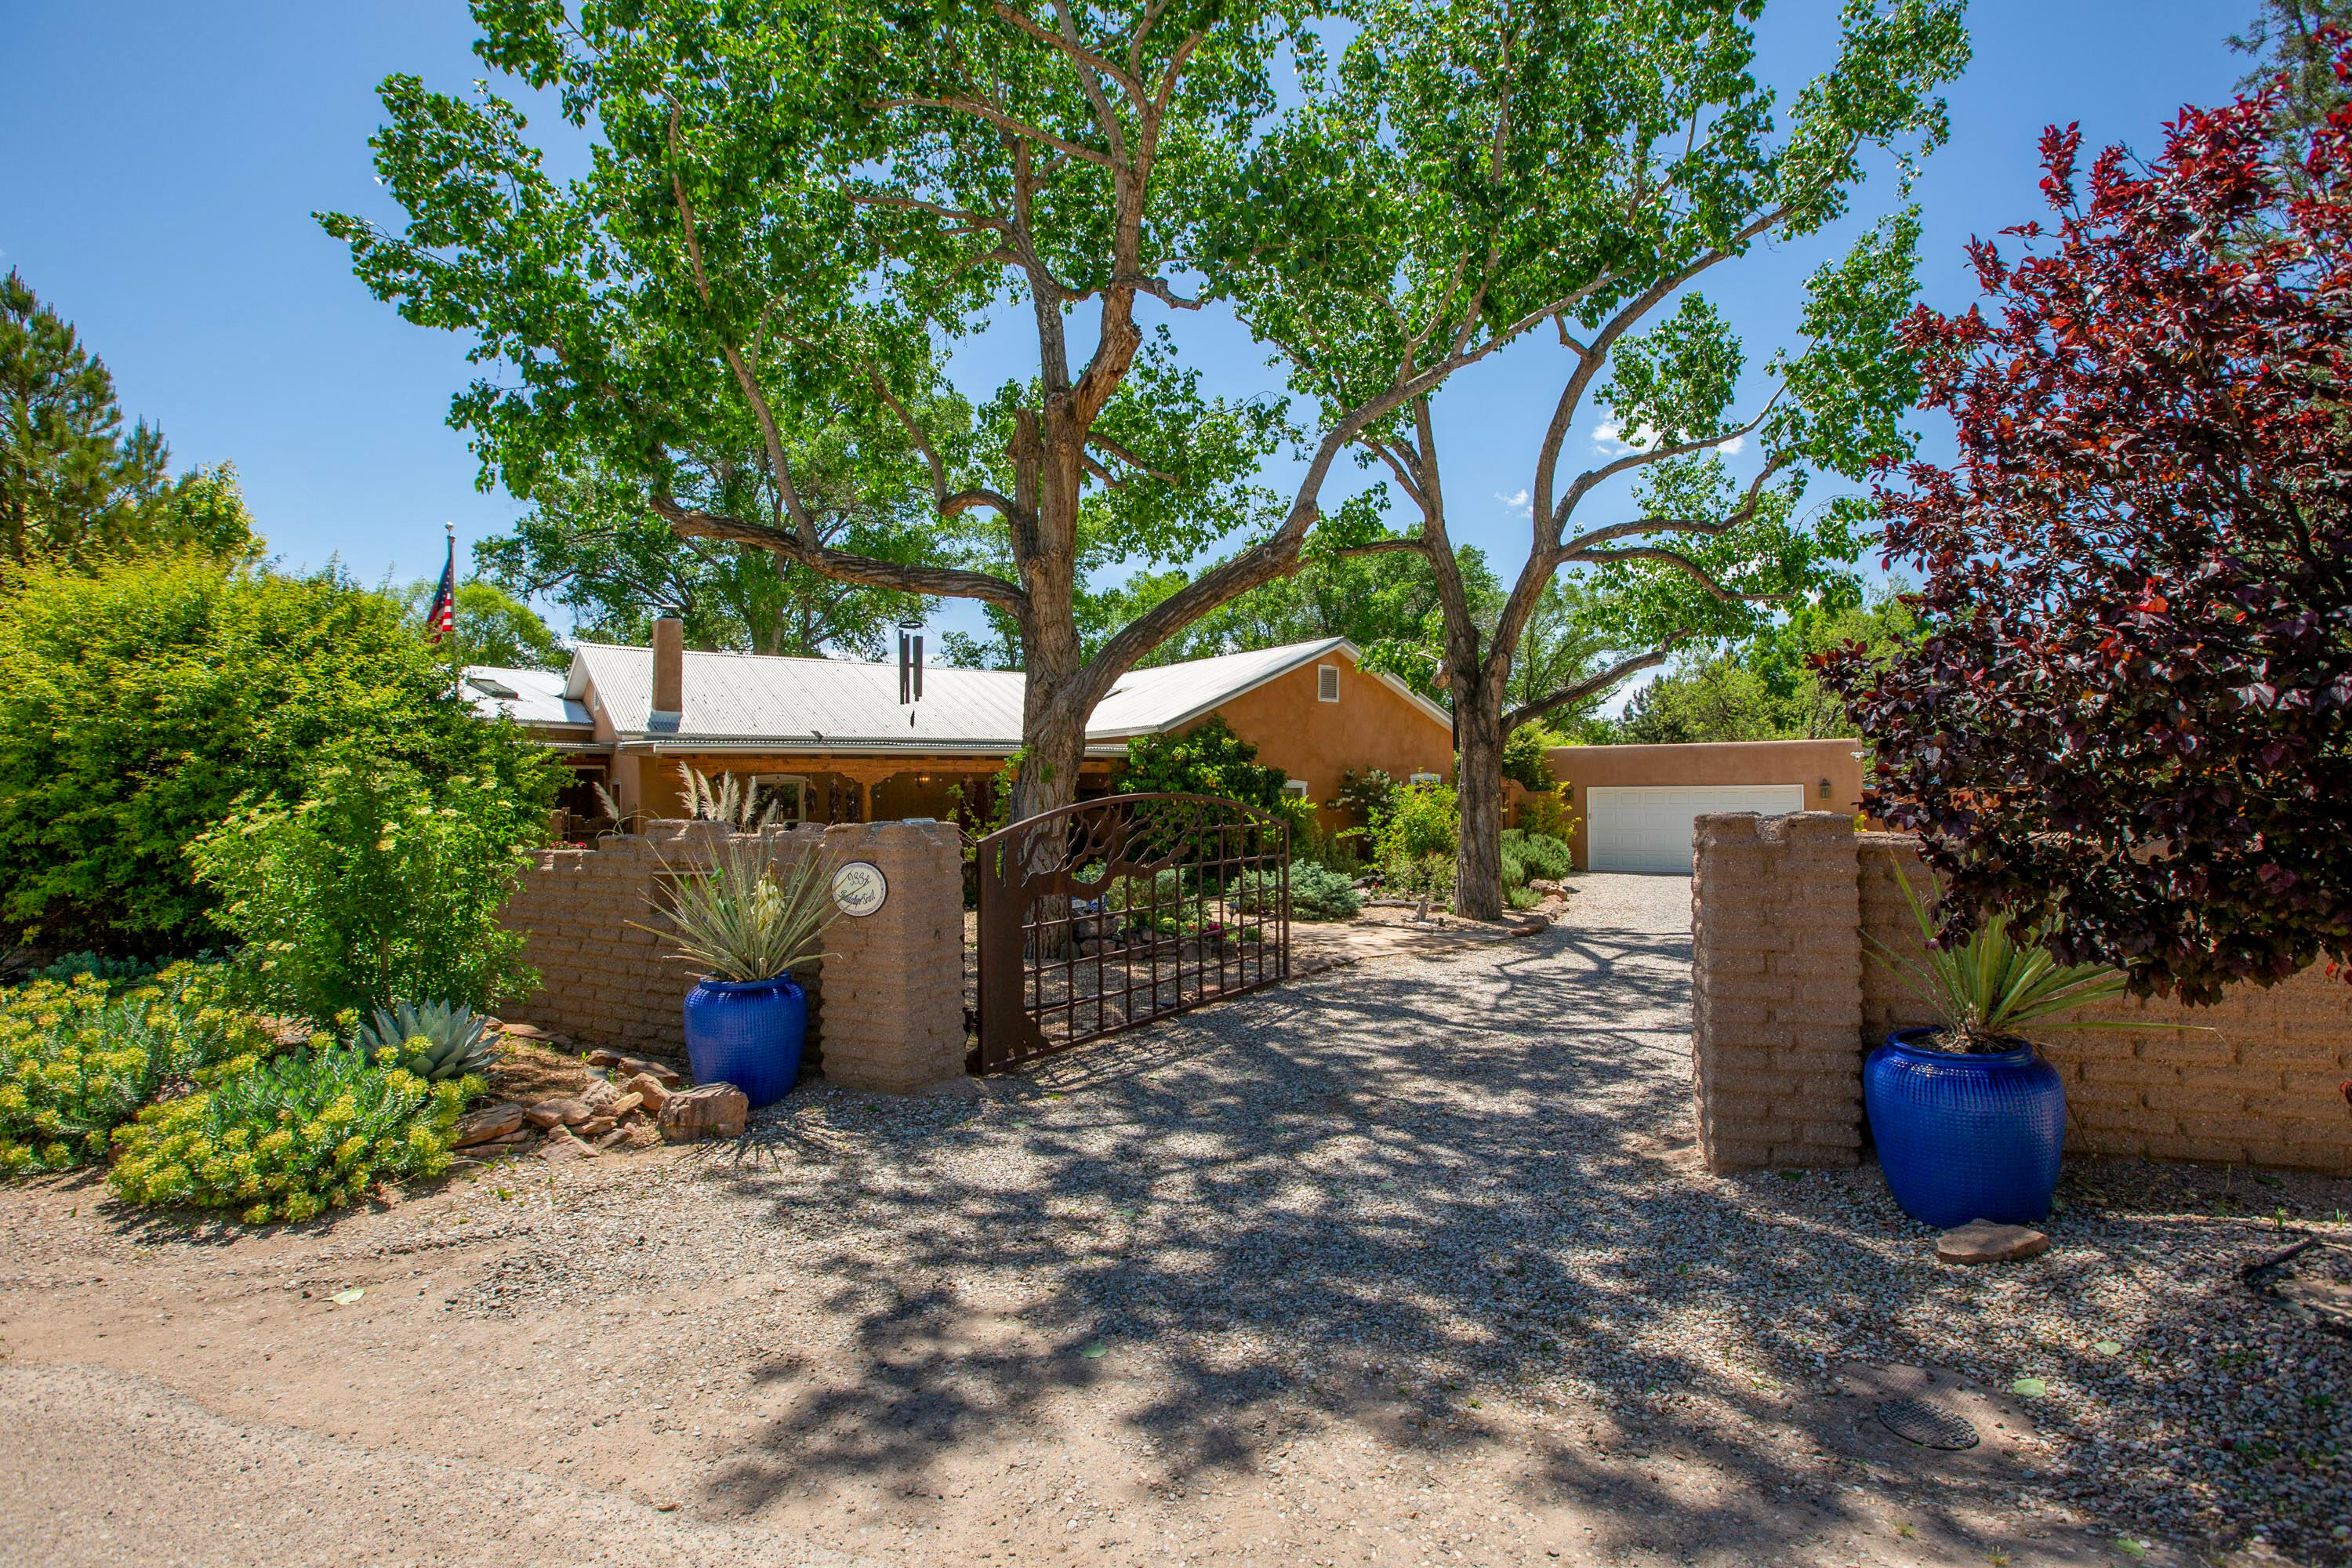 A North Valley oasis complete with stunning Northern NM architecture, beautiful gardens and a saltwater pool with cabana. This home has been lovingly maintained throughout the years. Originally, the Terrone adobe was built in 1901 and added onto over the years. A major remodel was done in 2015 adding gorgeous light filled rooms and connecting the guest house to the main house. Lovely patios abound and the entire property is walled for extreme privacy. Four fireplaces, wood beamed ceilings, stained concrete, and ceramic barn wood floors add to the ambiance and enhance the home's livability. 4-5 bedrooms and an office provide the space for gracious living. The incredible kitchen has 2 refrigerators, 2 dishwashers, and two ovens, custom cabinetry and, a large quartz island. Large pantry.